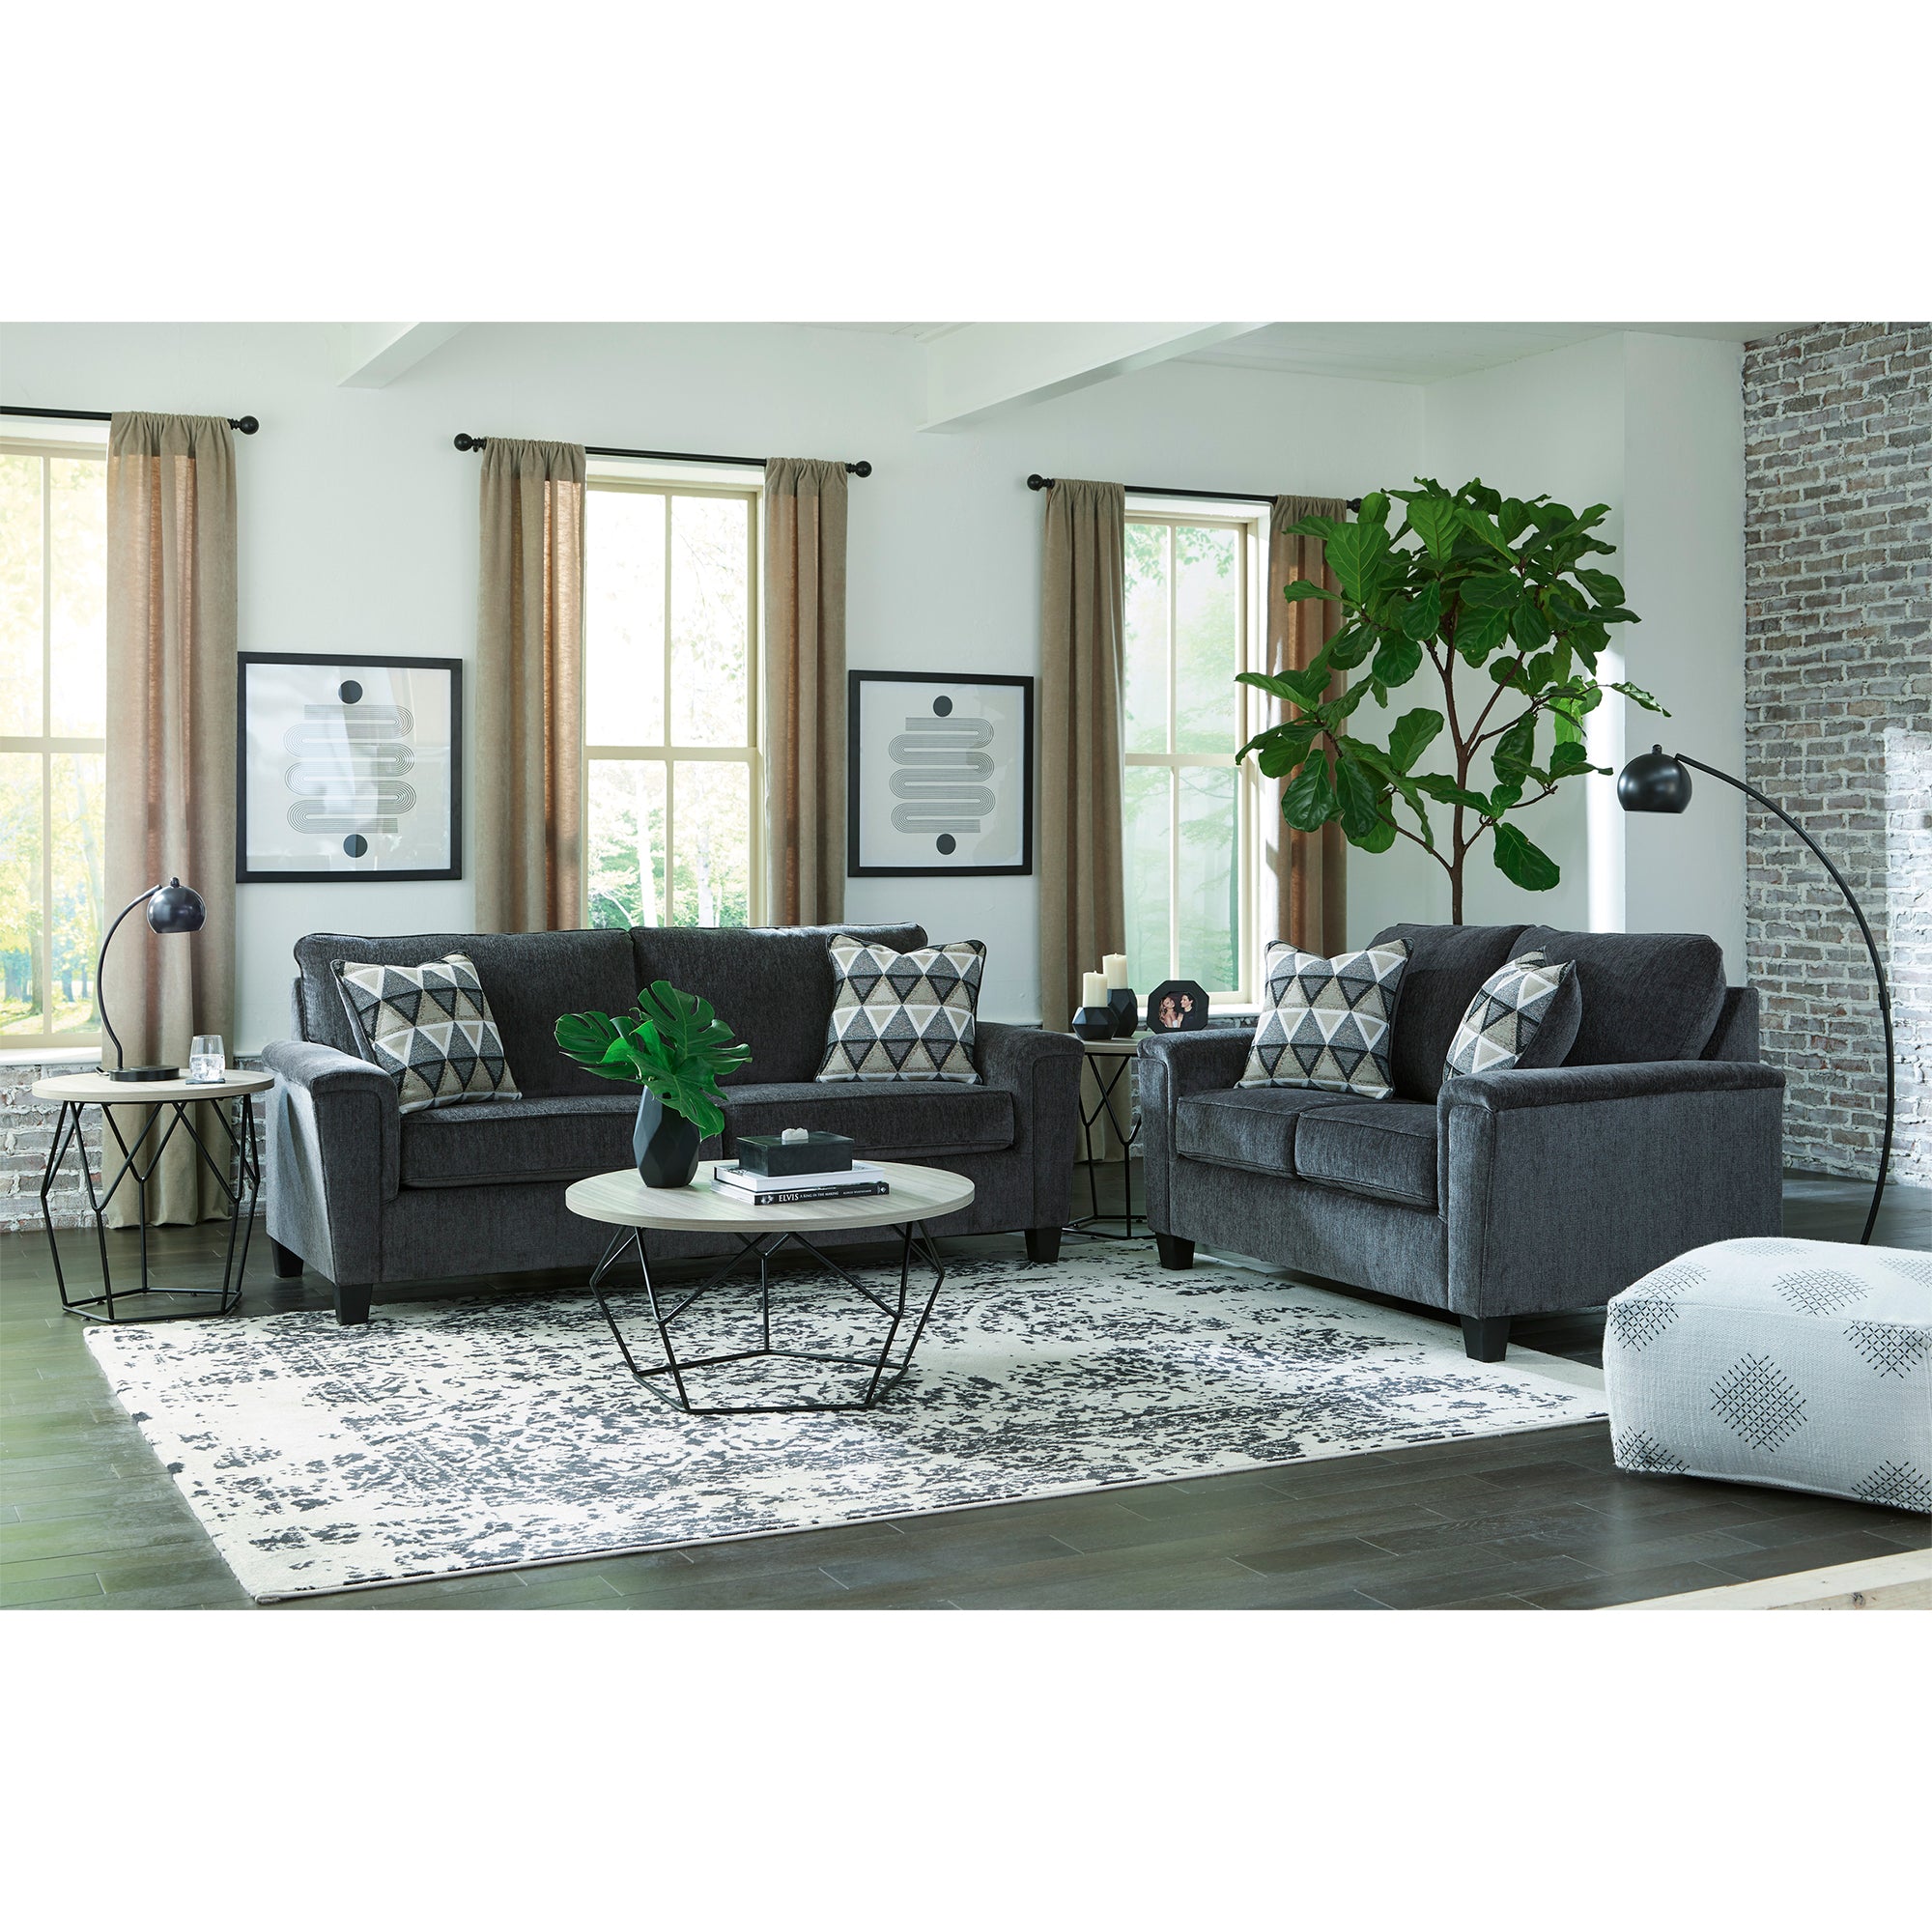 Abinger Sofa and Loveseat in Smoke Color